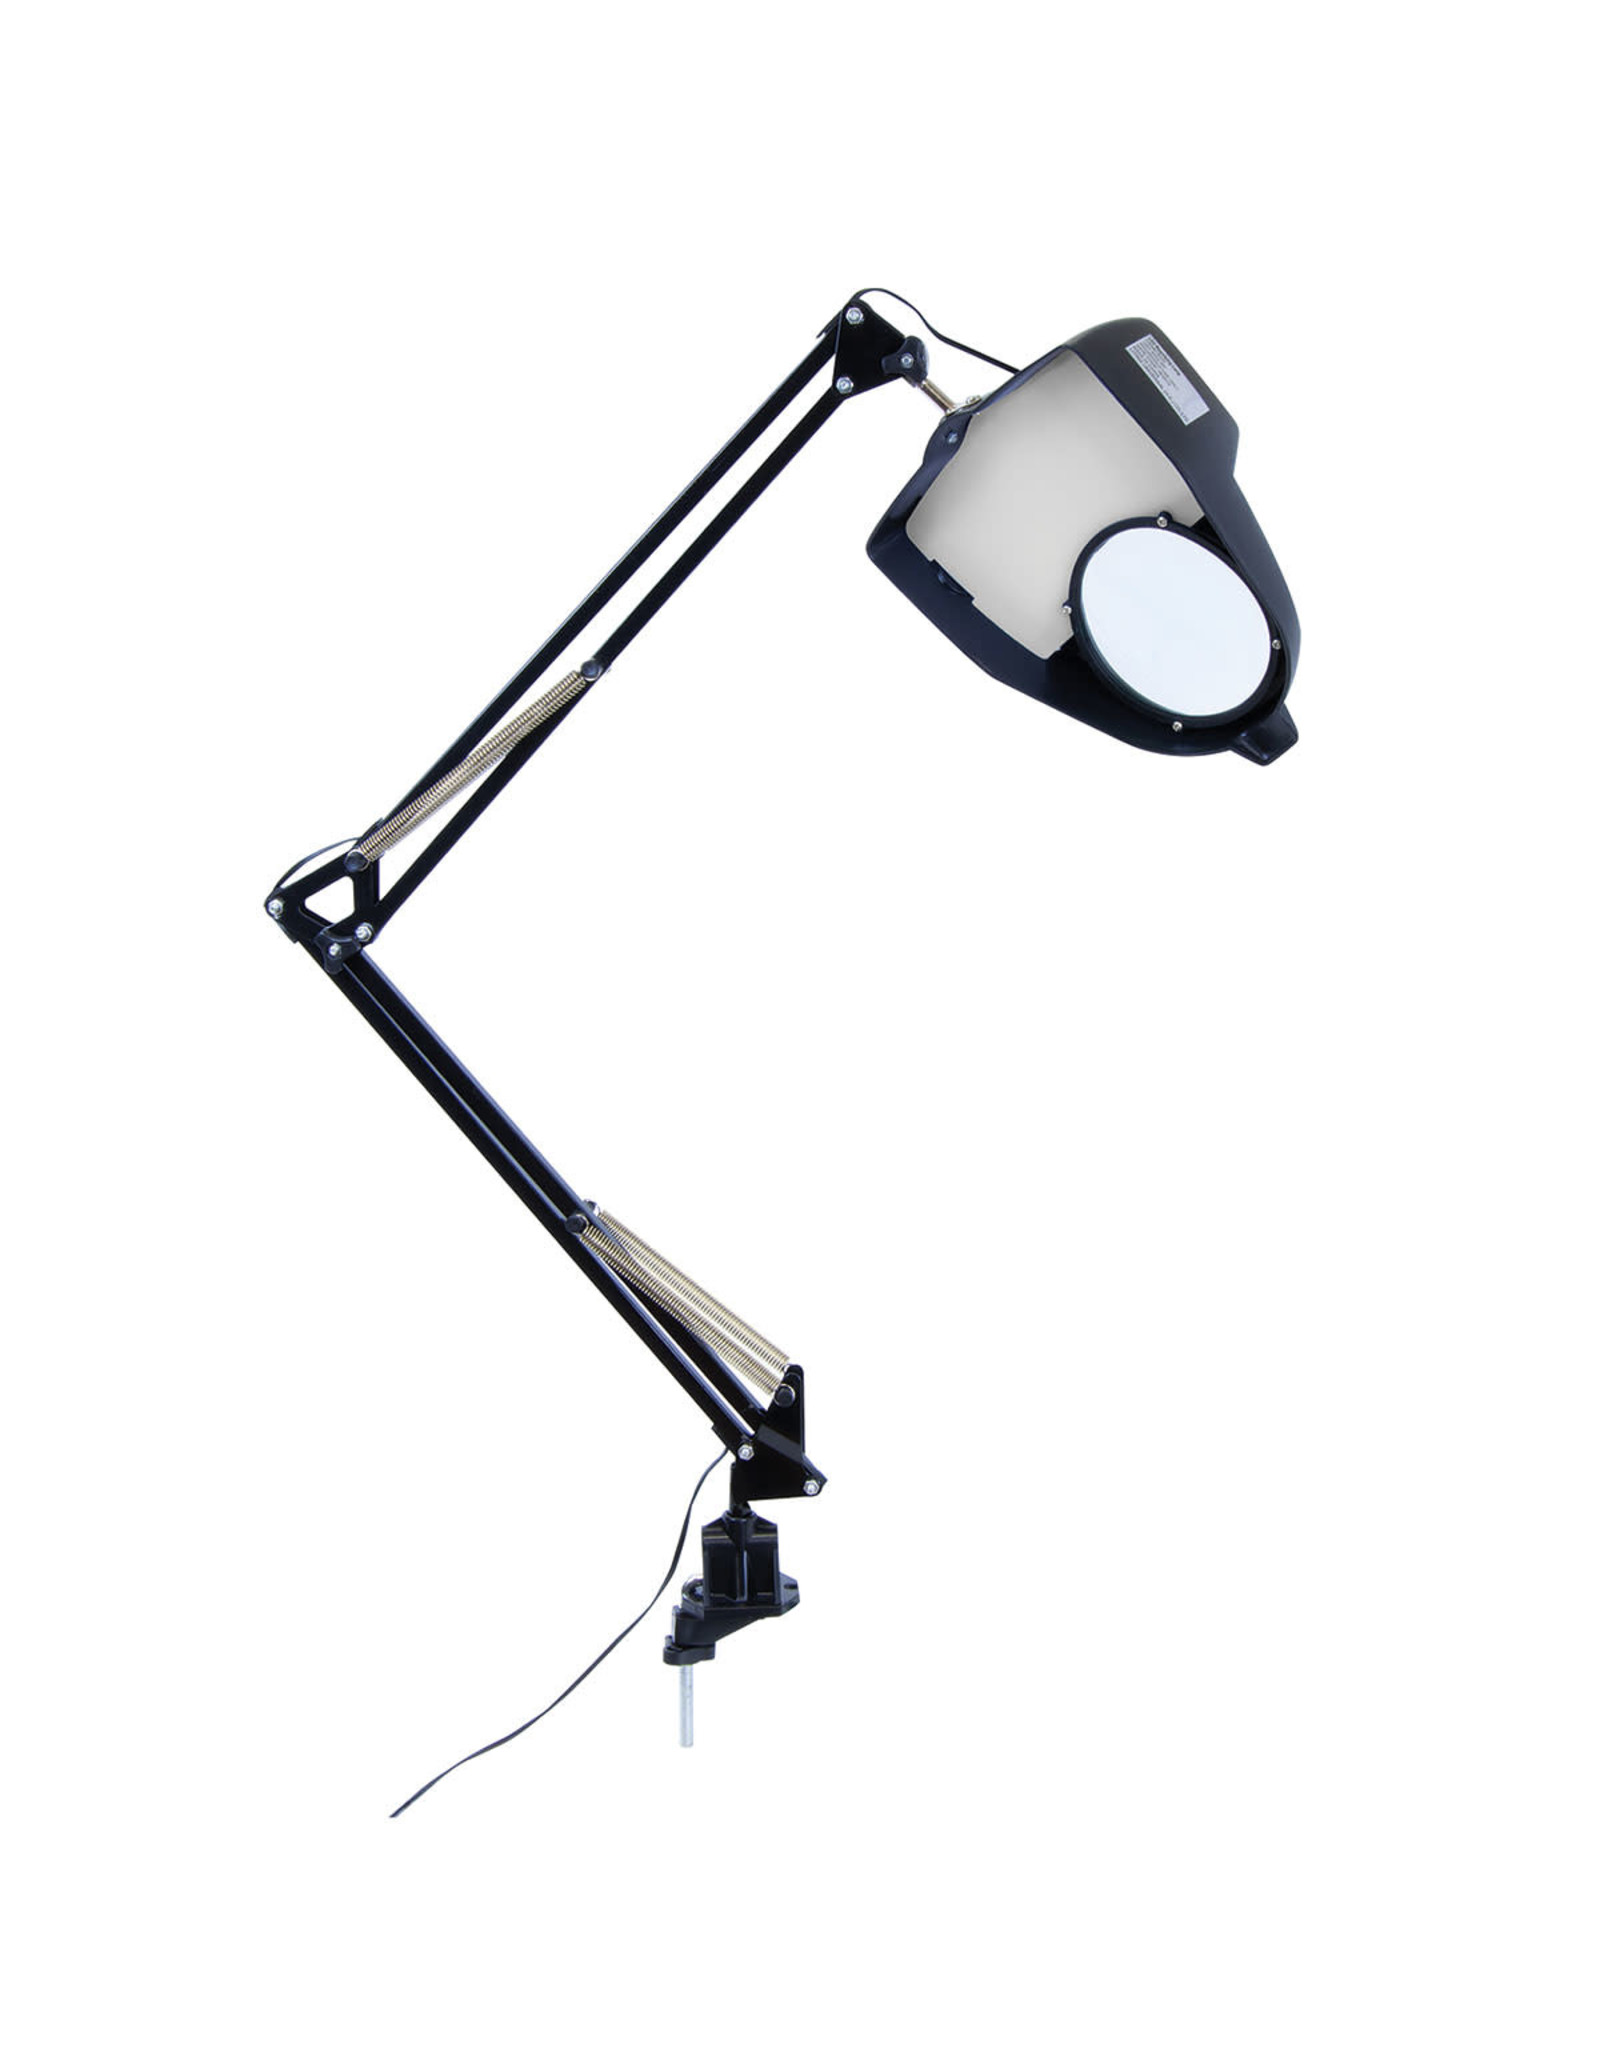 LED Magnifying Lamp - The Art Store/Commercial Art Supply